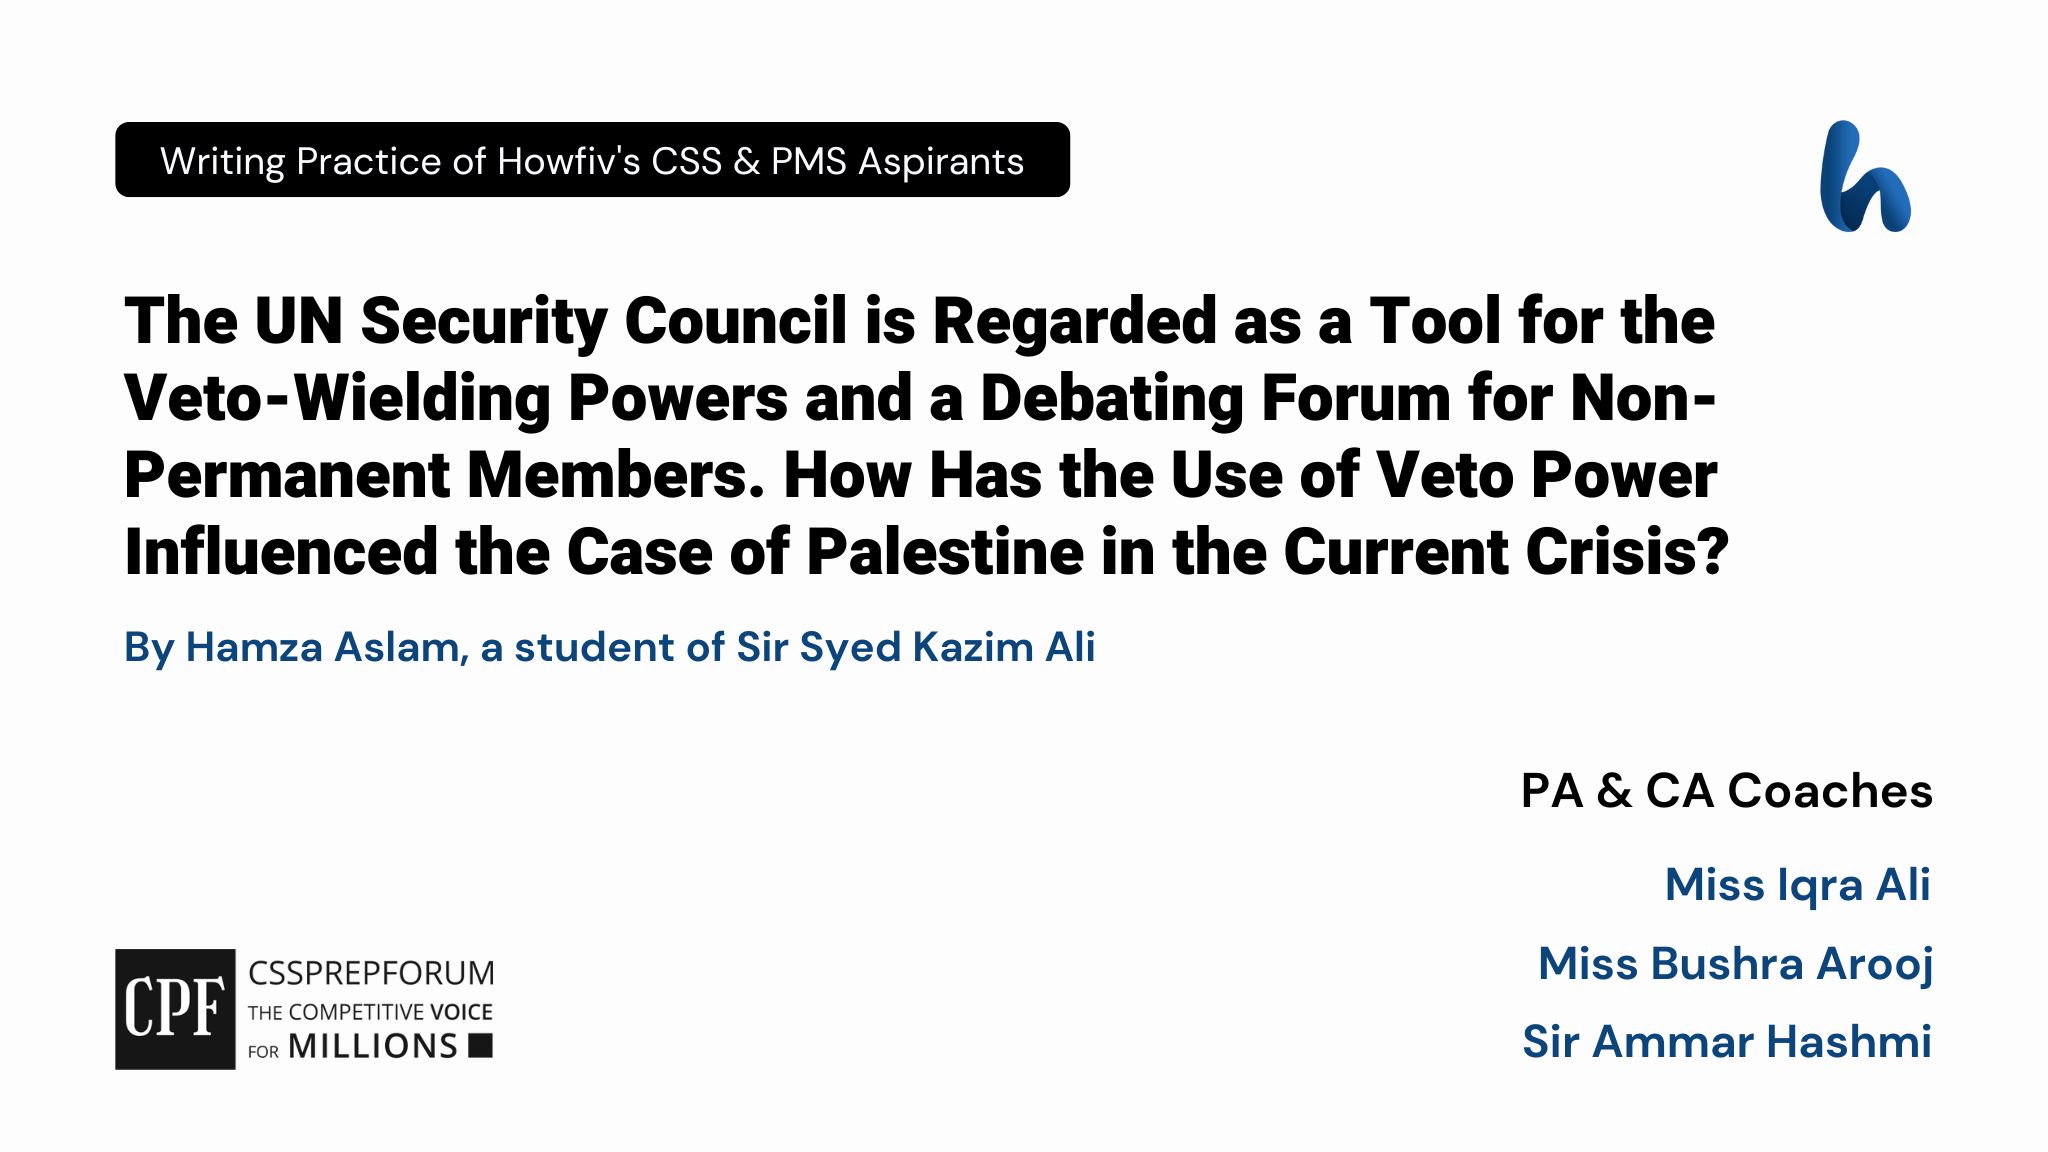 The UN Security Council is Regarded as a Tool for the Veto-Wielding Powers and a Debating Forum for Non-Permanent Members. How Has the Use of Veto Power Influenced the Case of Palestine in the Current Crisis?